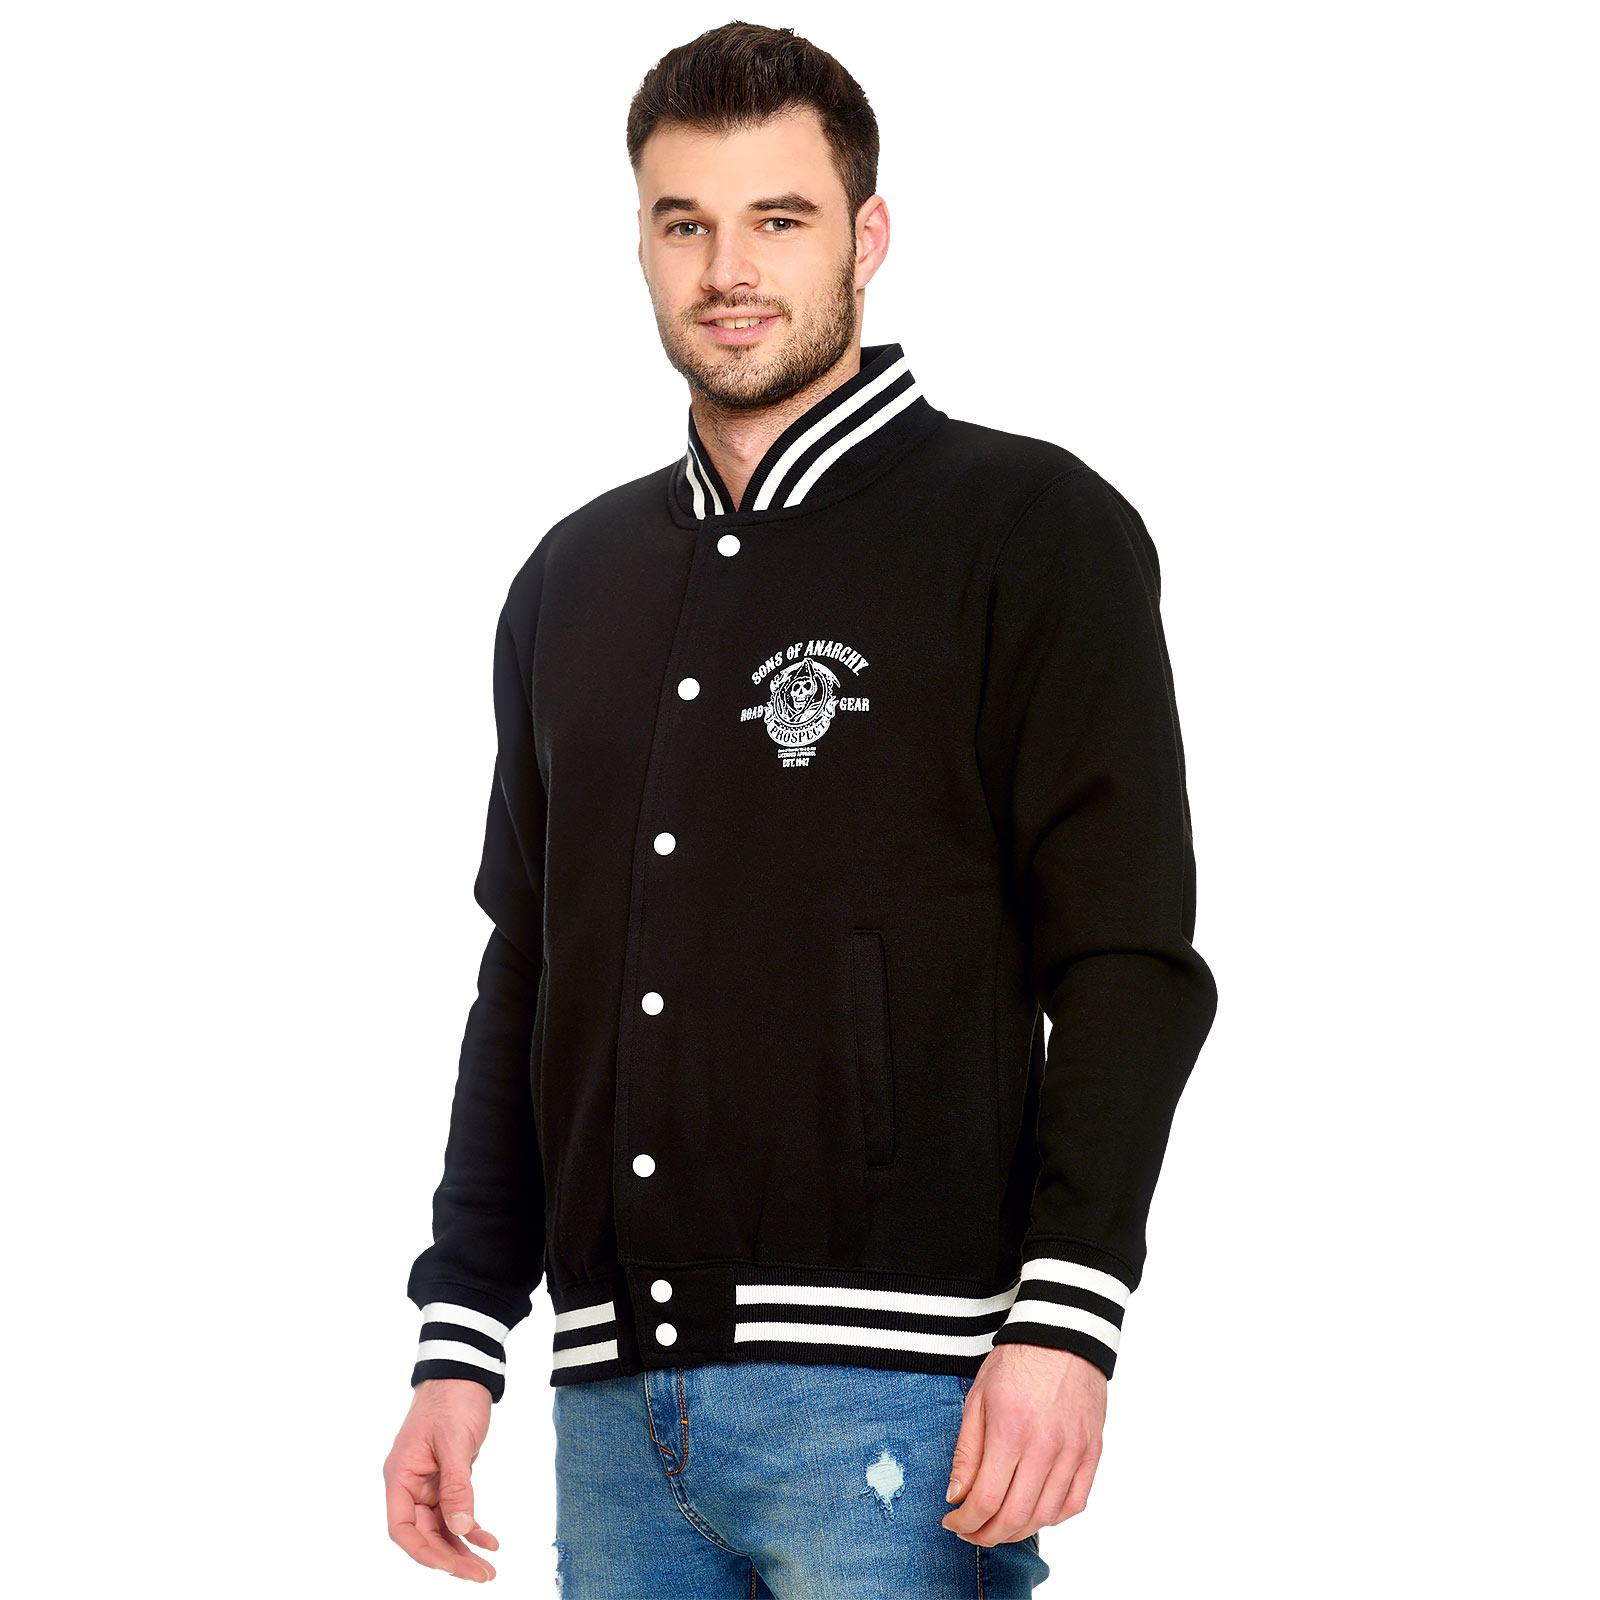 Sons of Anarchy - Reaper & Prospect College Jacket black-white